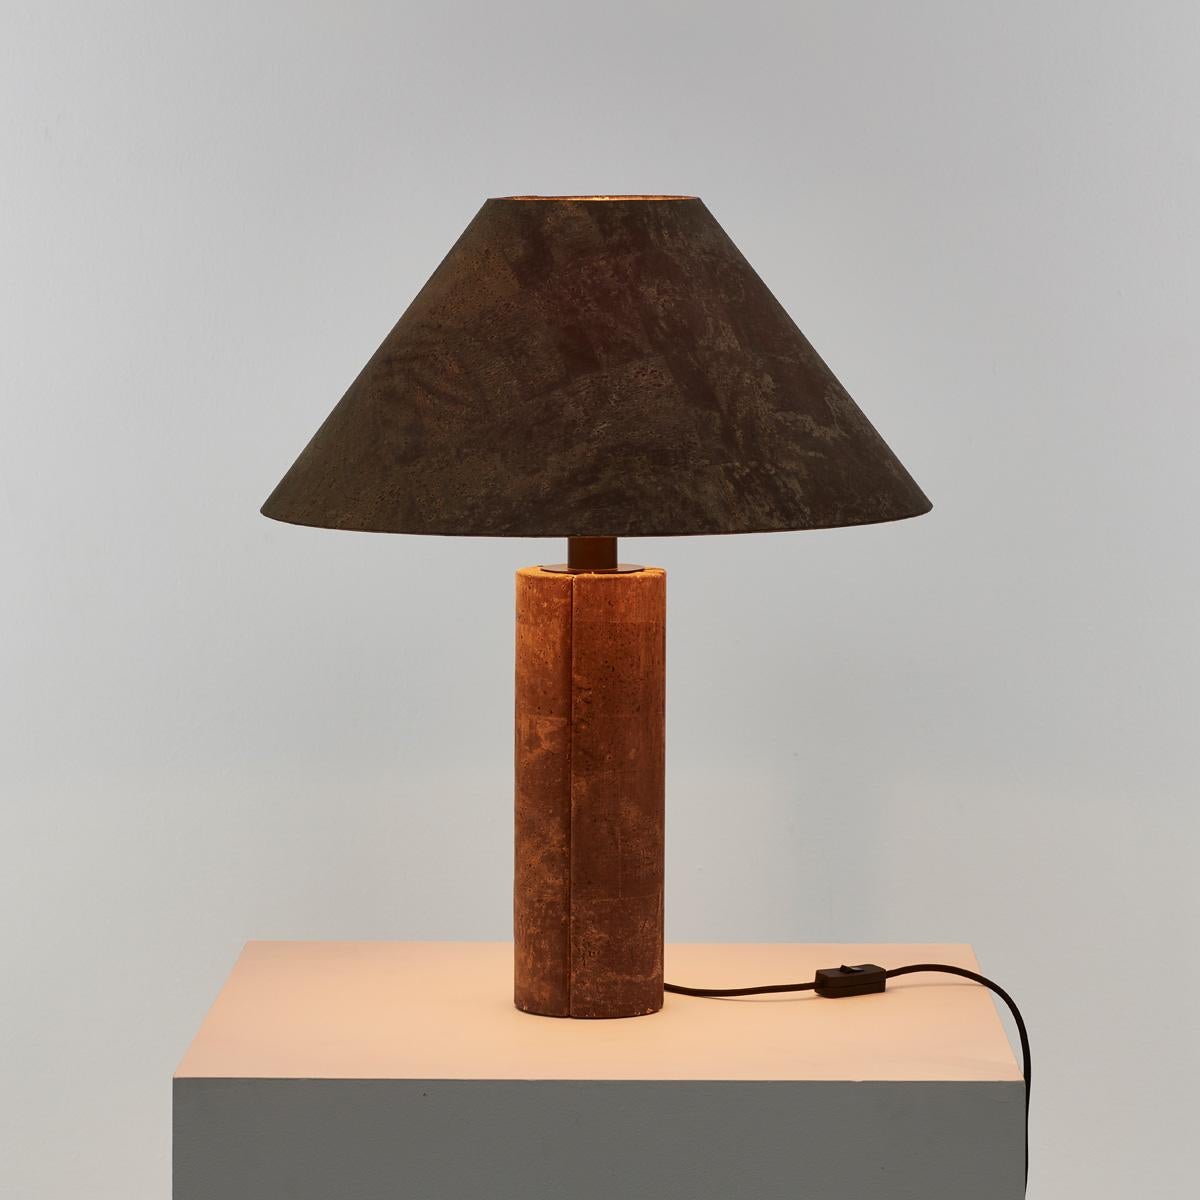 Pair of Ingo Maurer Cork Lamps for Design M, Germany 1974 For Sale 1